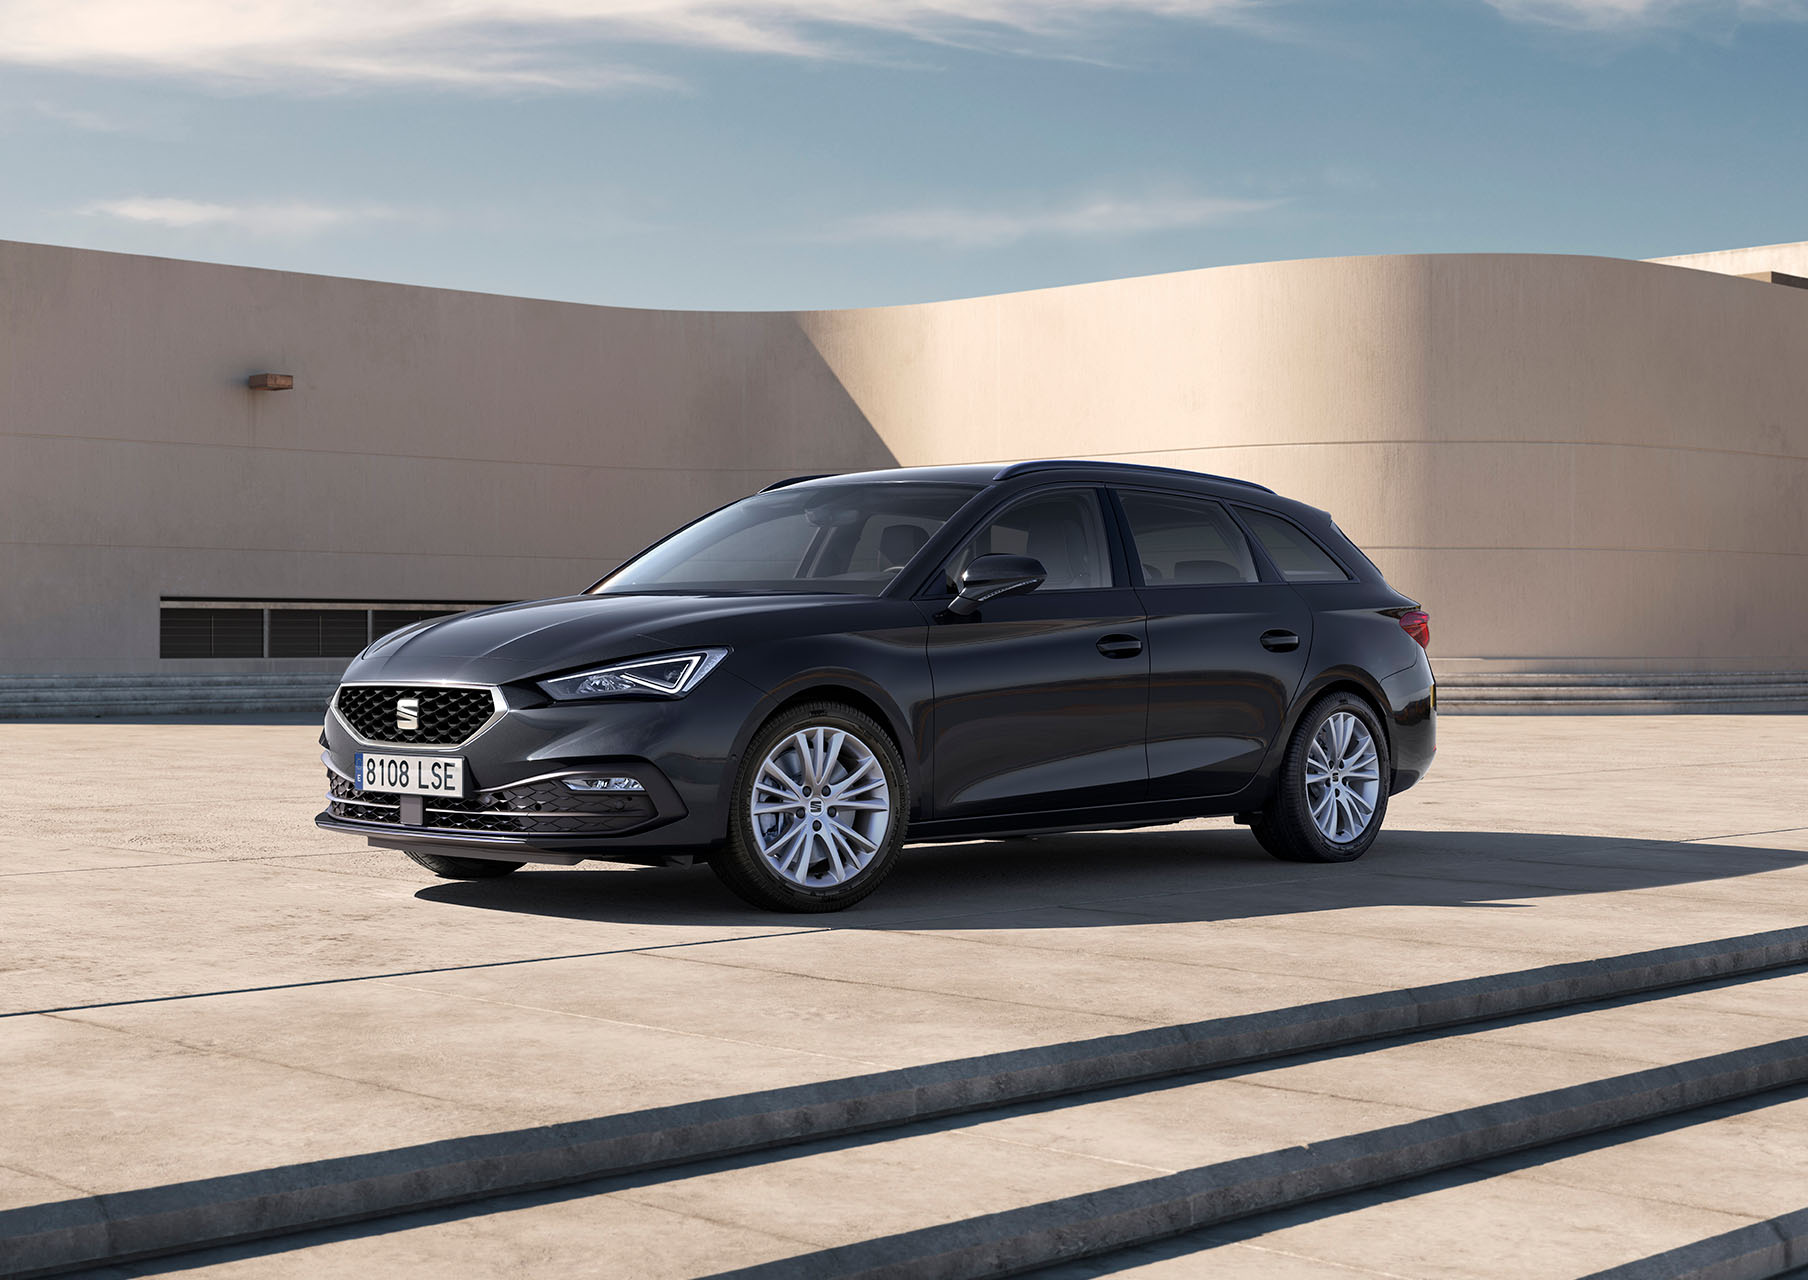 seat leon sportstourer style trim midnight black colour with dynamic alloy wheels parked